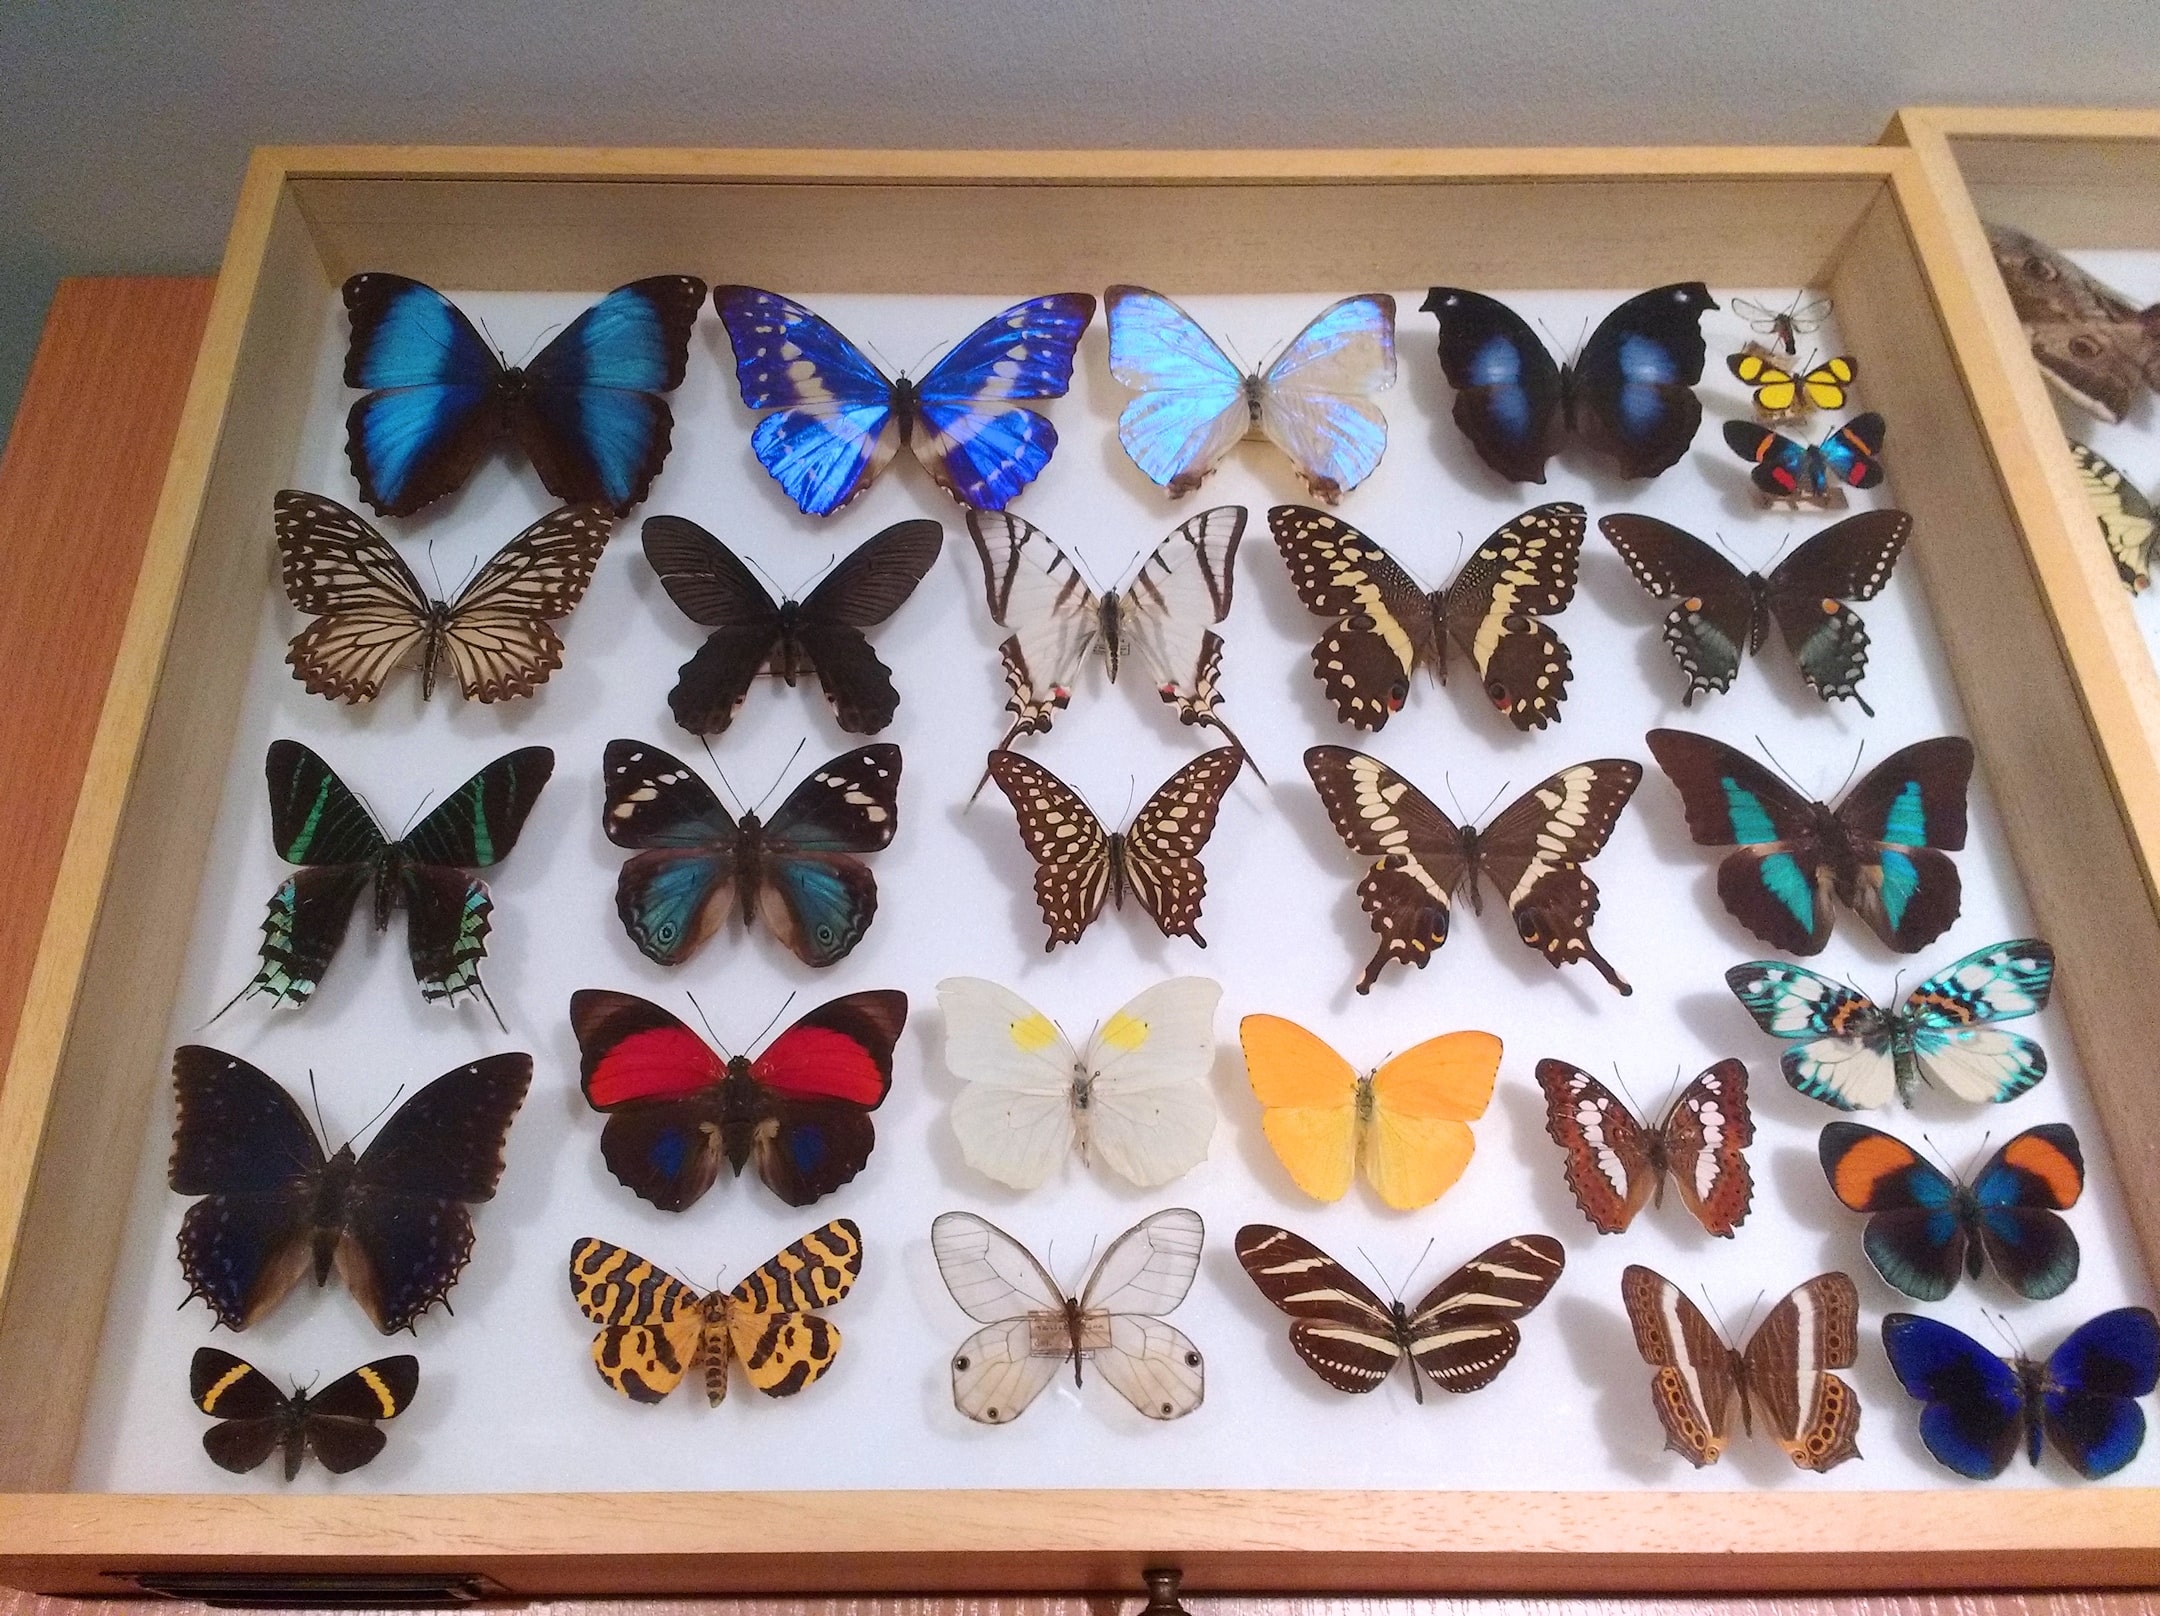 The work of a lepidopterist